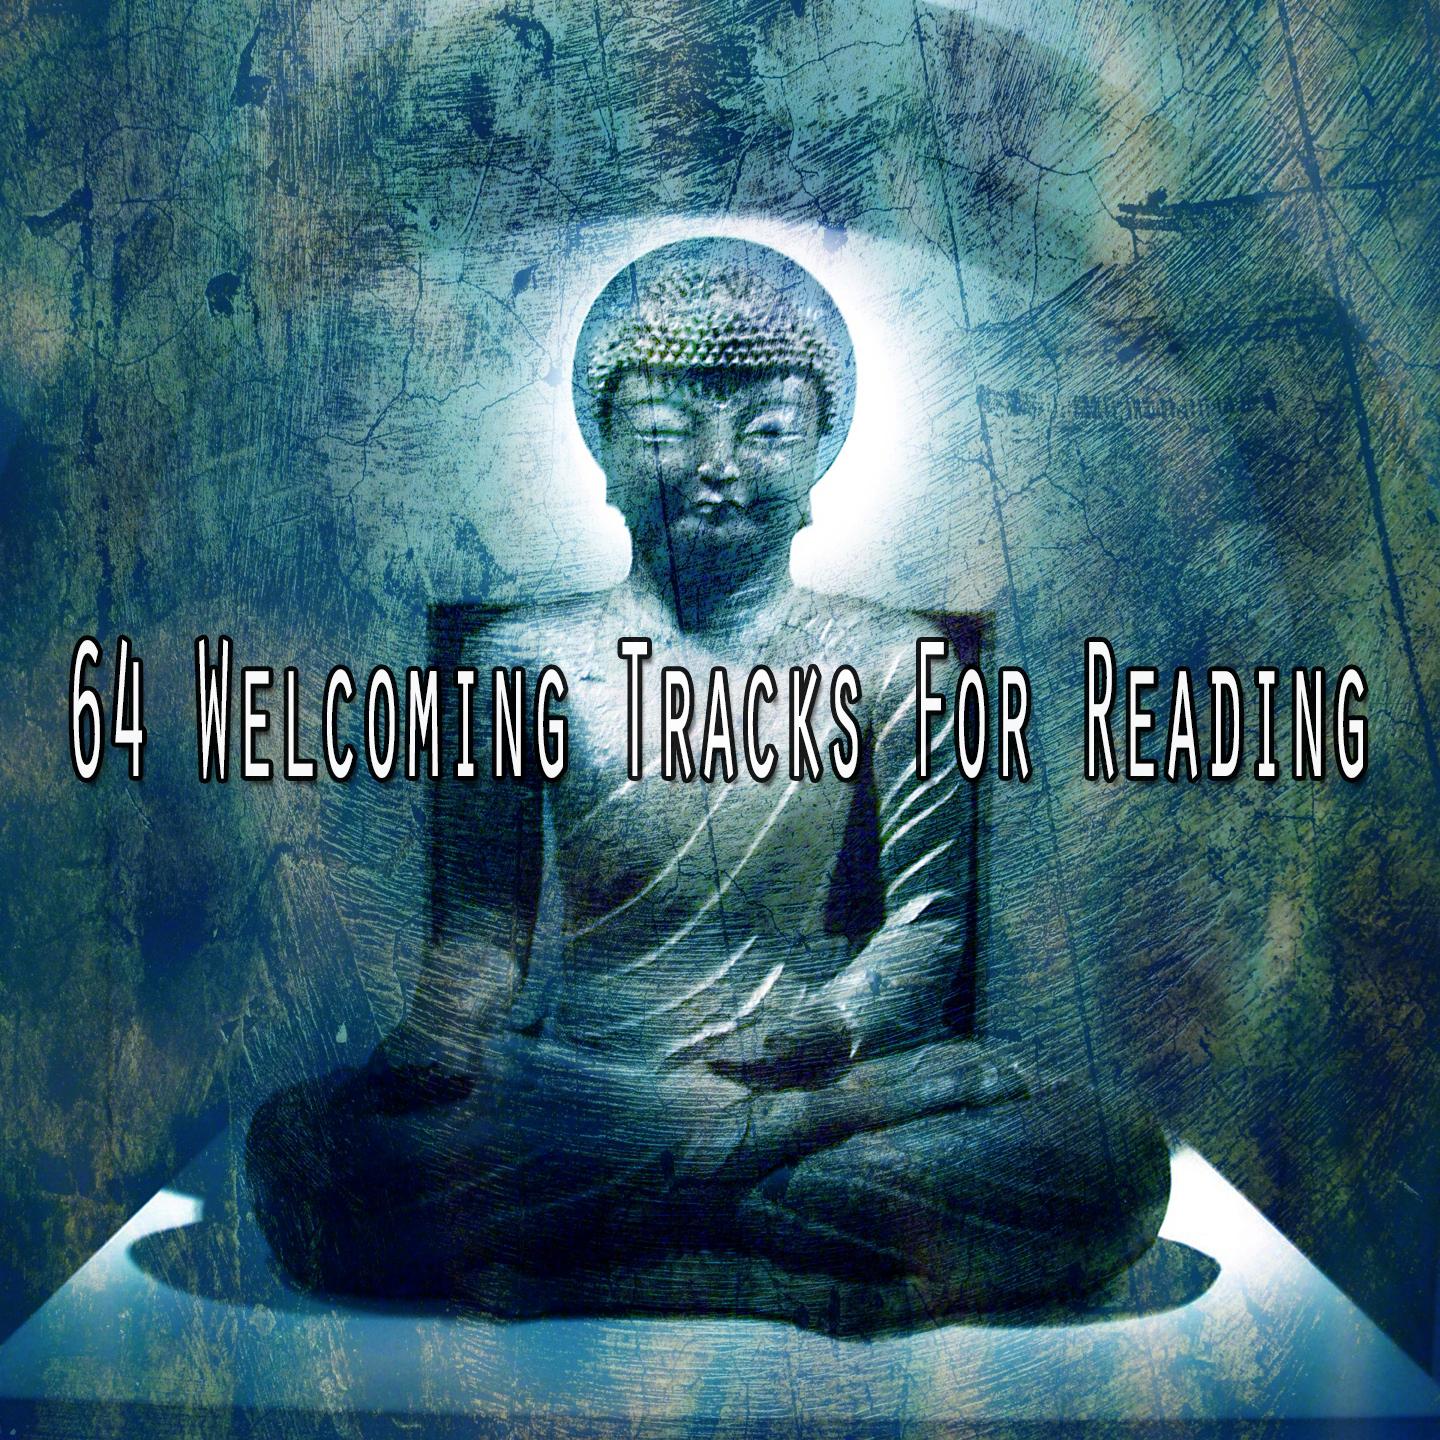 64 Welcoming Tracks for Reading